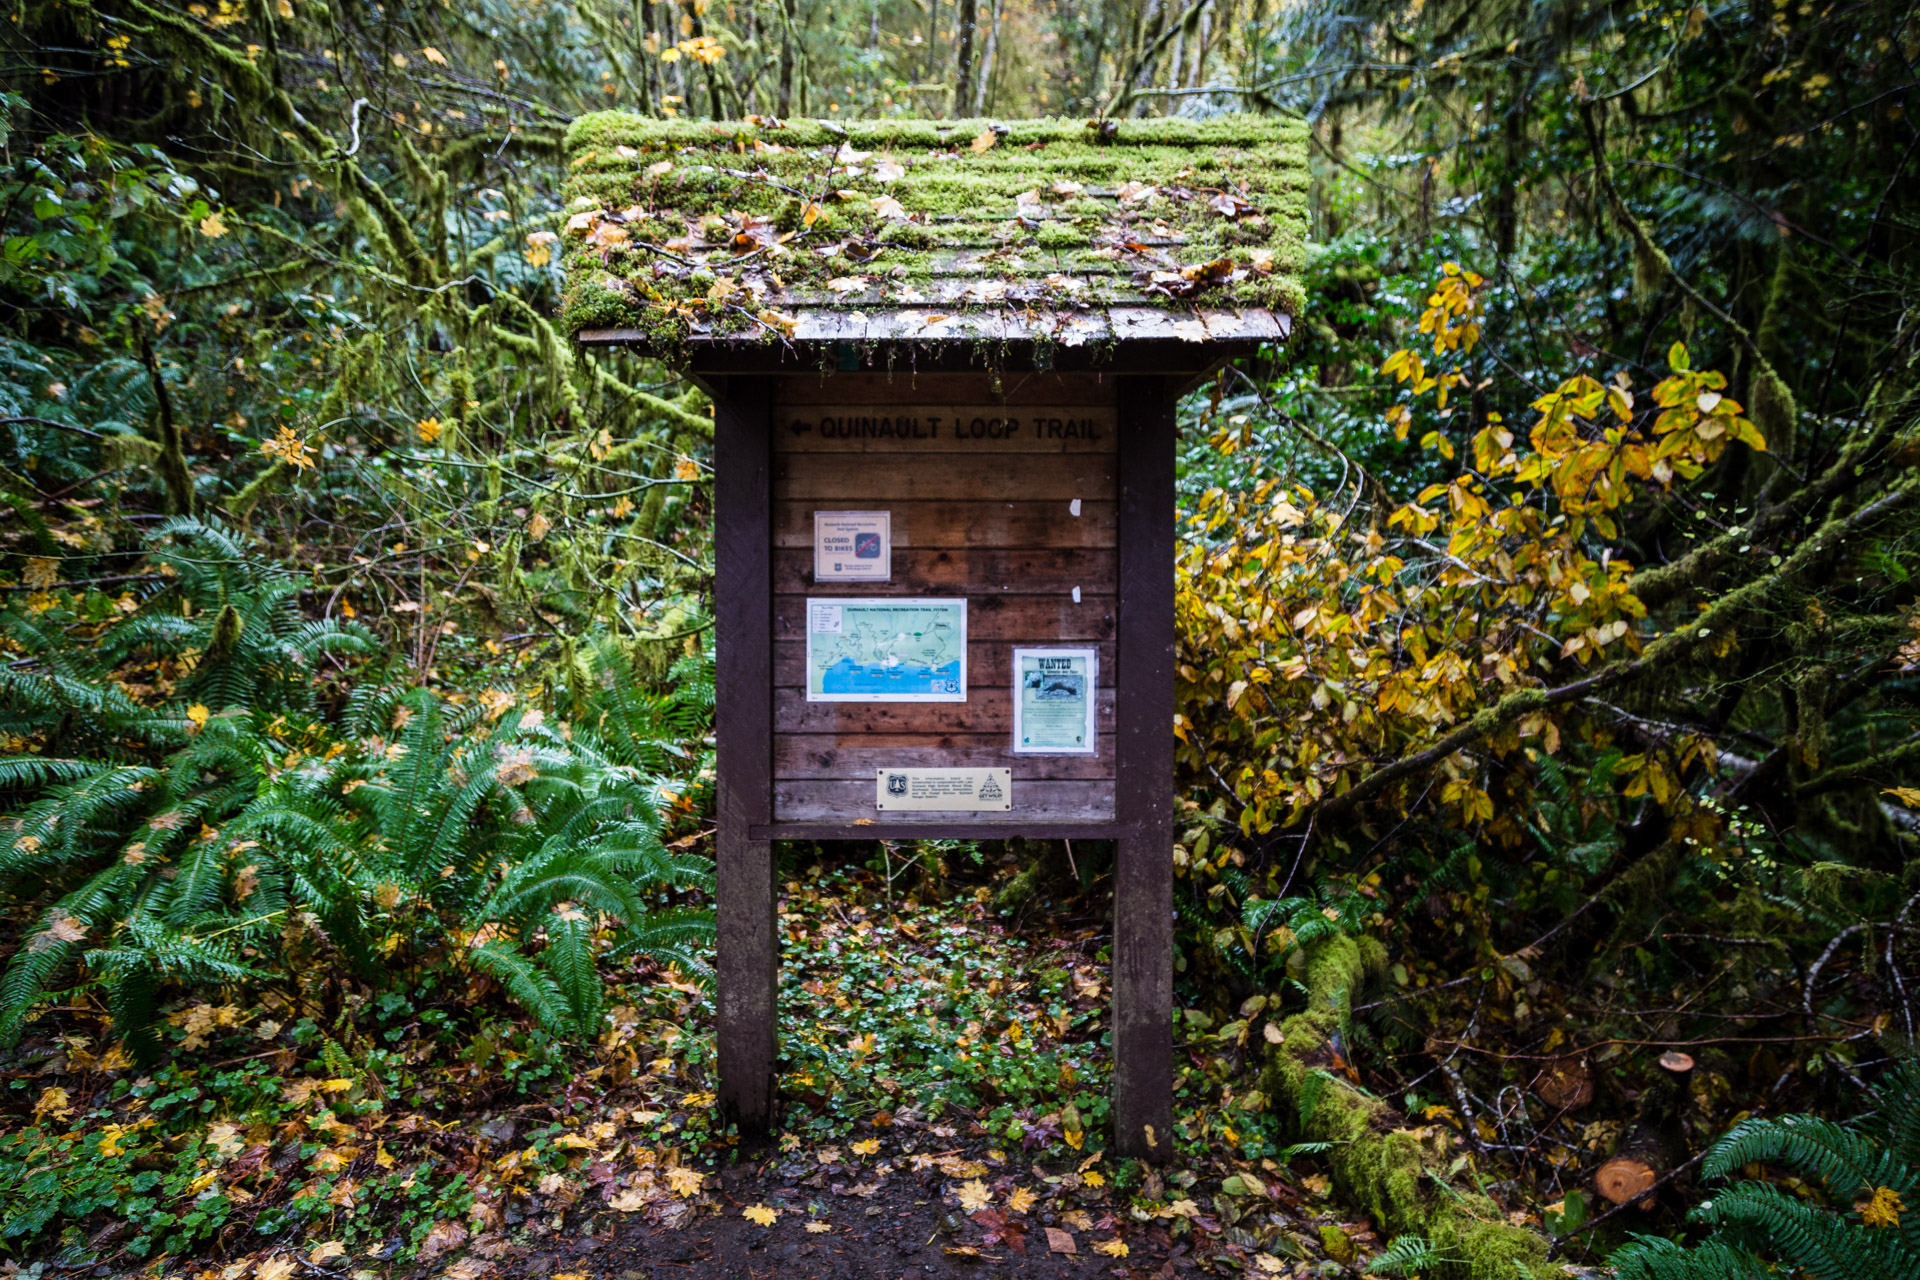 Lake Quinault (trail sign)